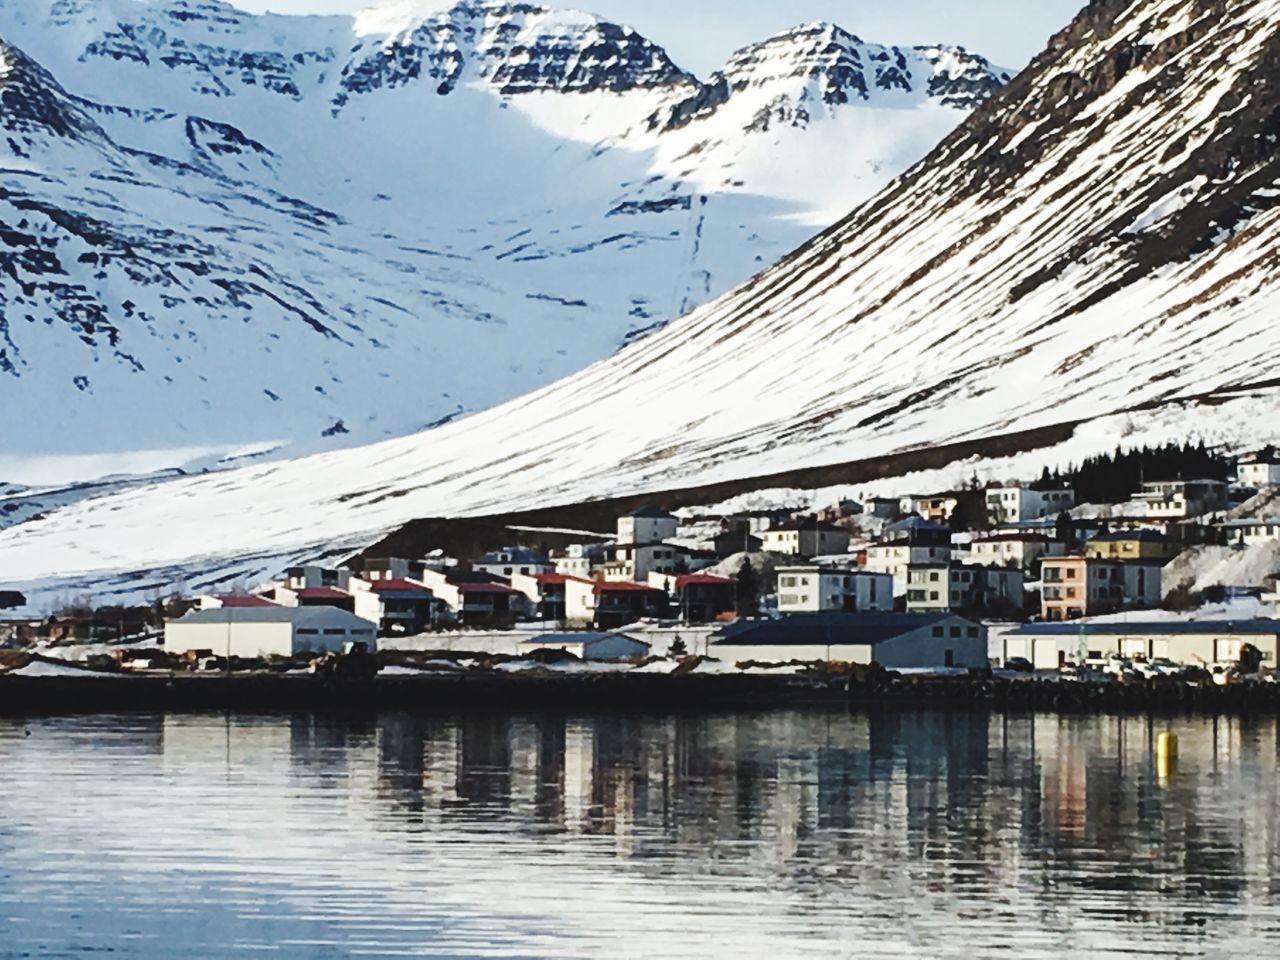 REFLECTION OF HOUSES AND SNOWCAPPED MOUNTAIN IN WINTER